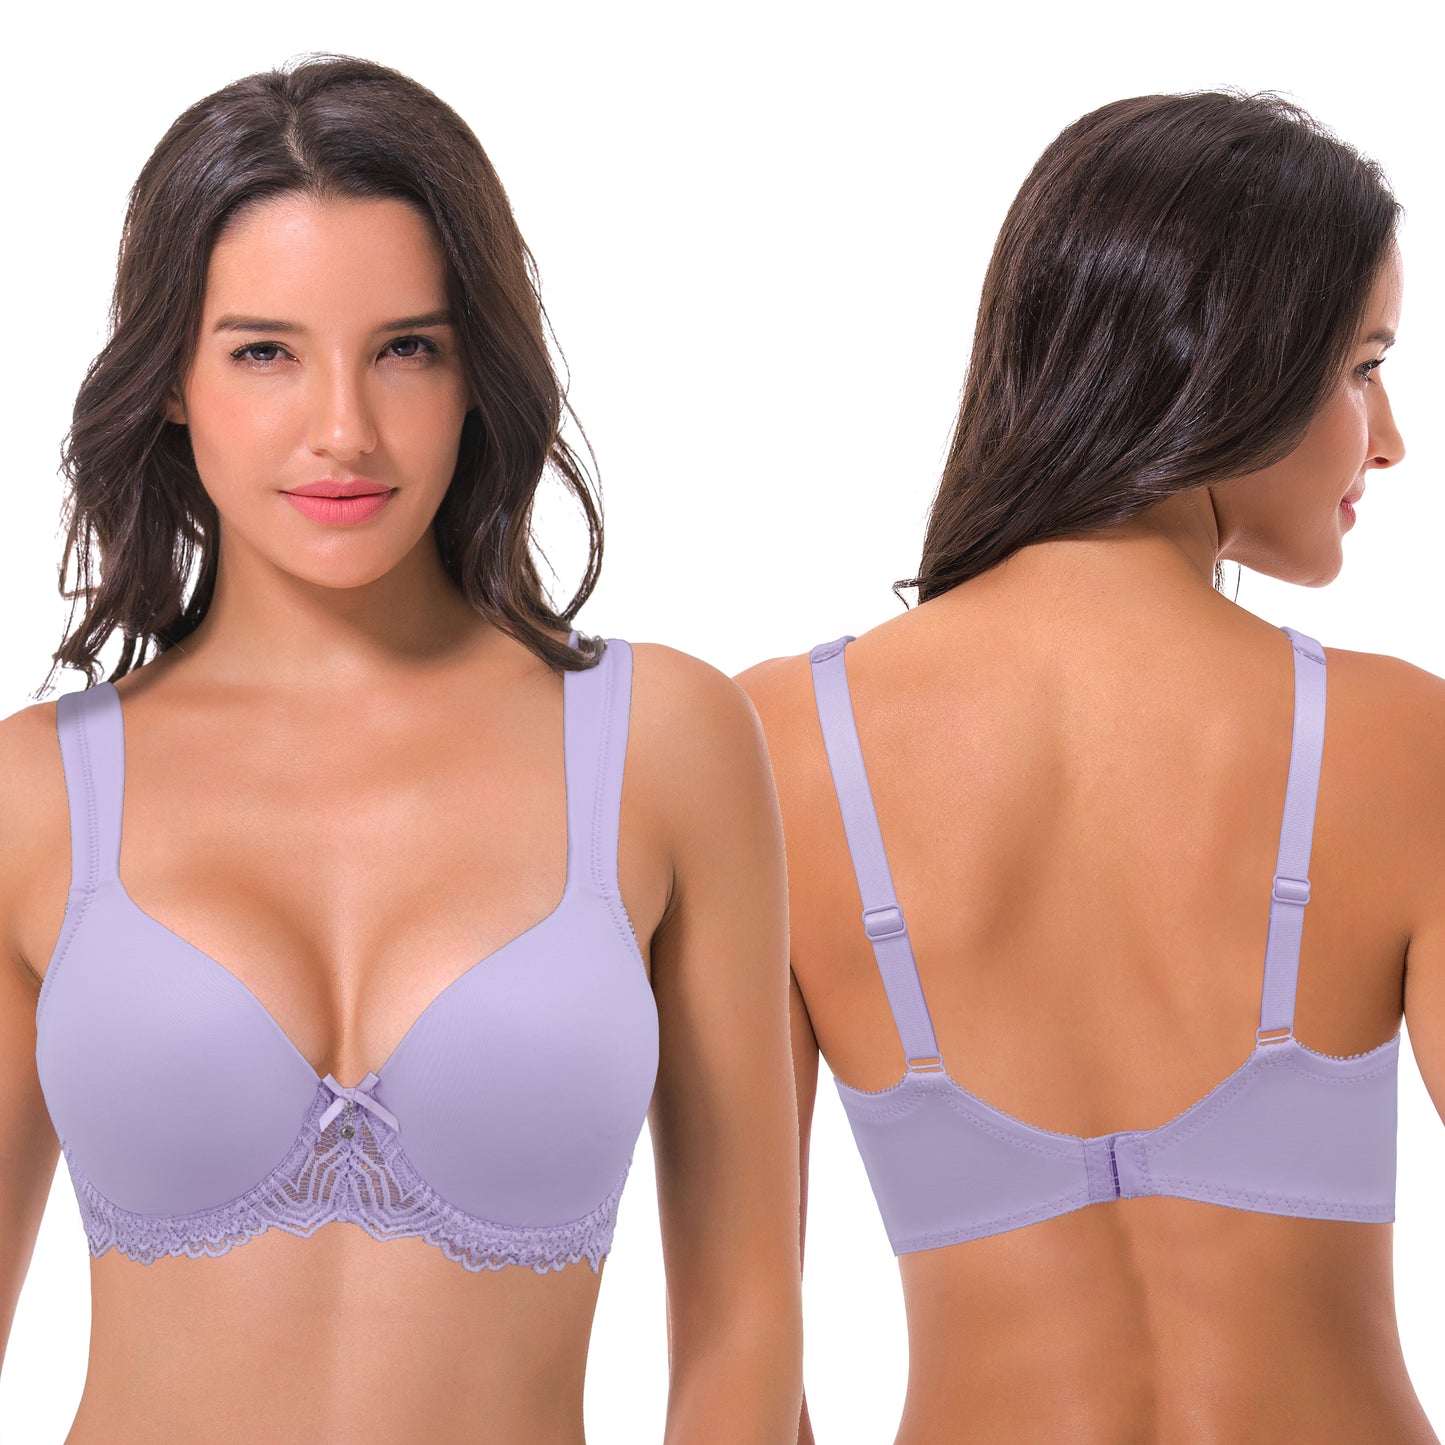 Women's Lightly Padded Underwire Lace Bra with Padded Shoulder Straps-2PK-LIGHT PURPLE,NUDE